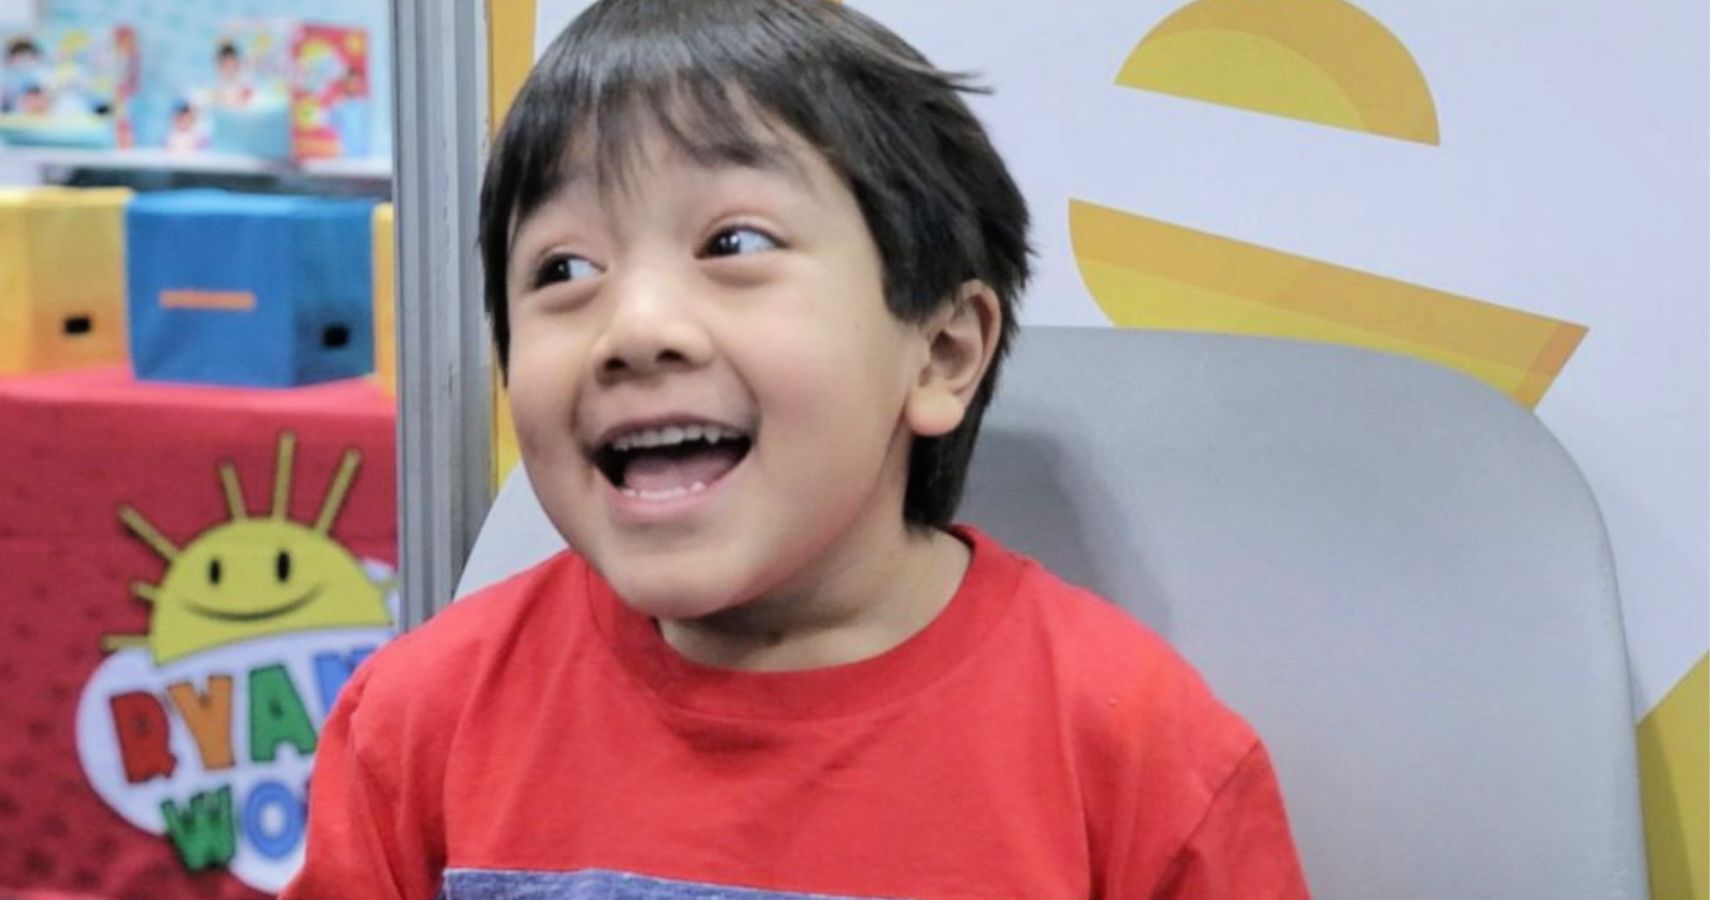 Ryan ToysReview Raked In Even More Money This Year